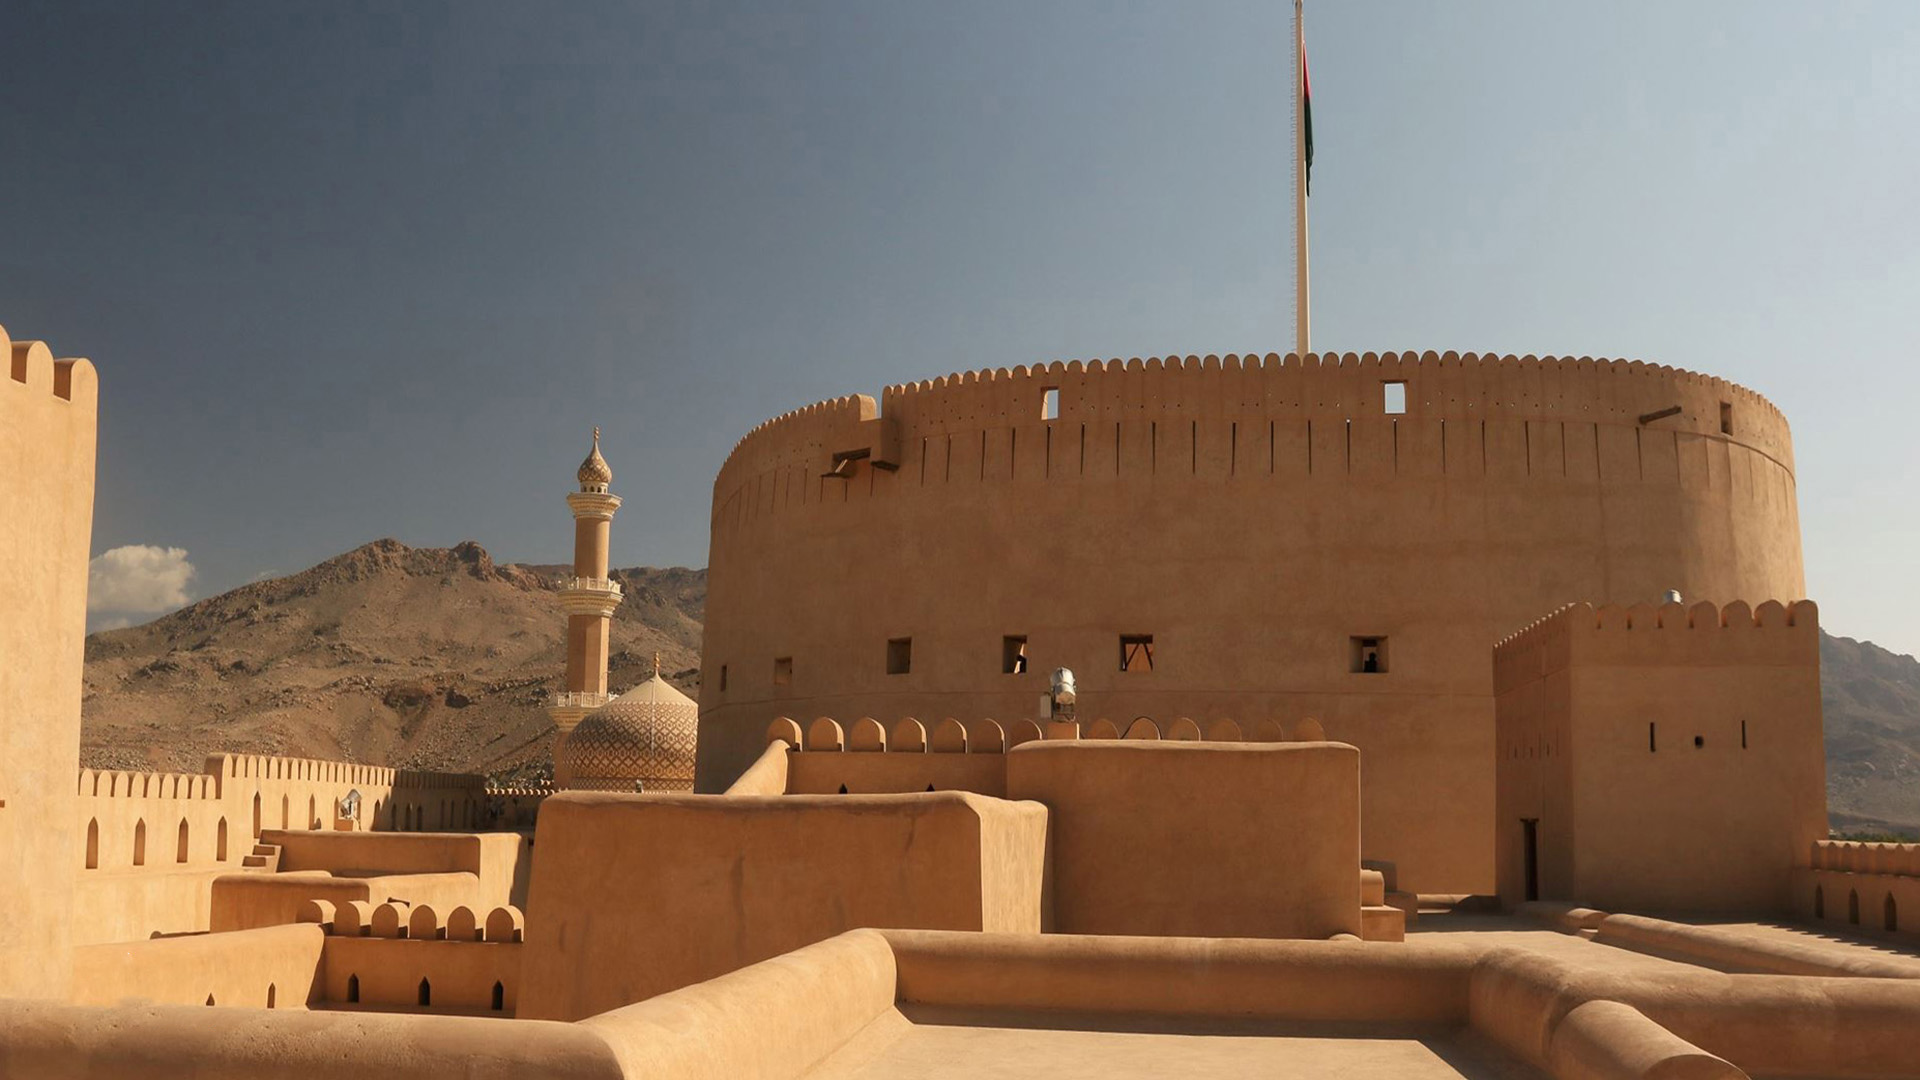 In a panoramic photograph, the grandeur of Nizwa Fort is captured, representing an architectural masterpiece that stands as a symbol of the city's rich historical significance.